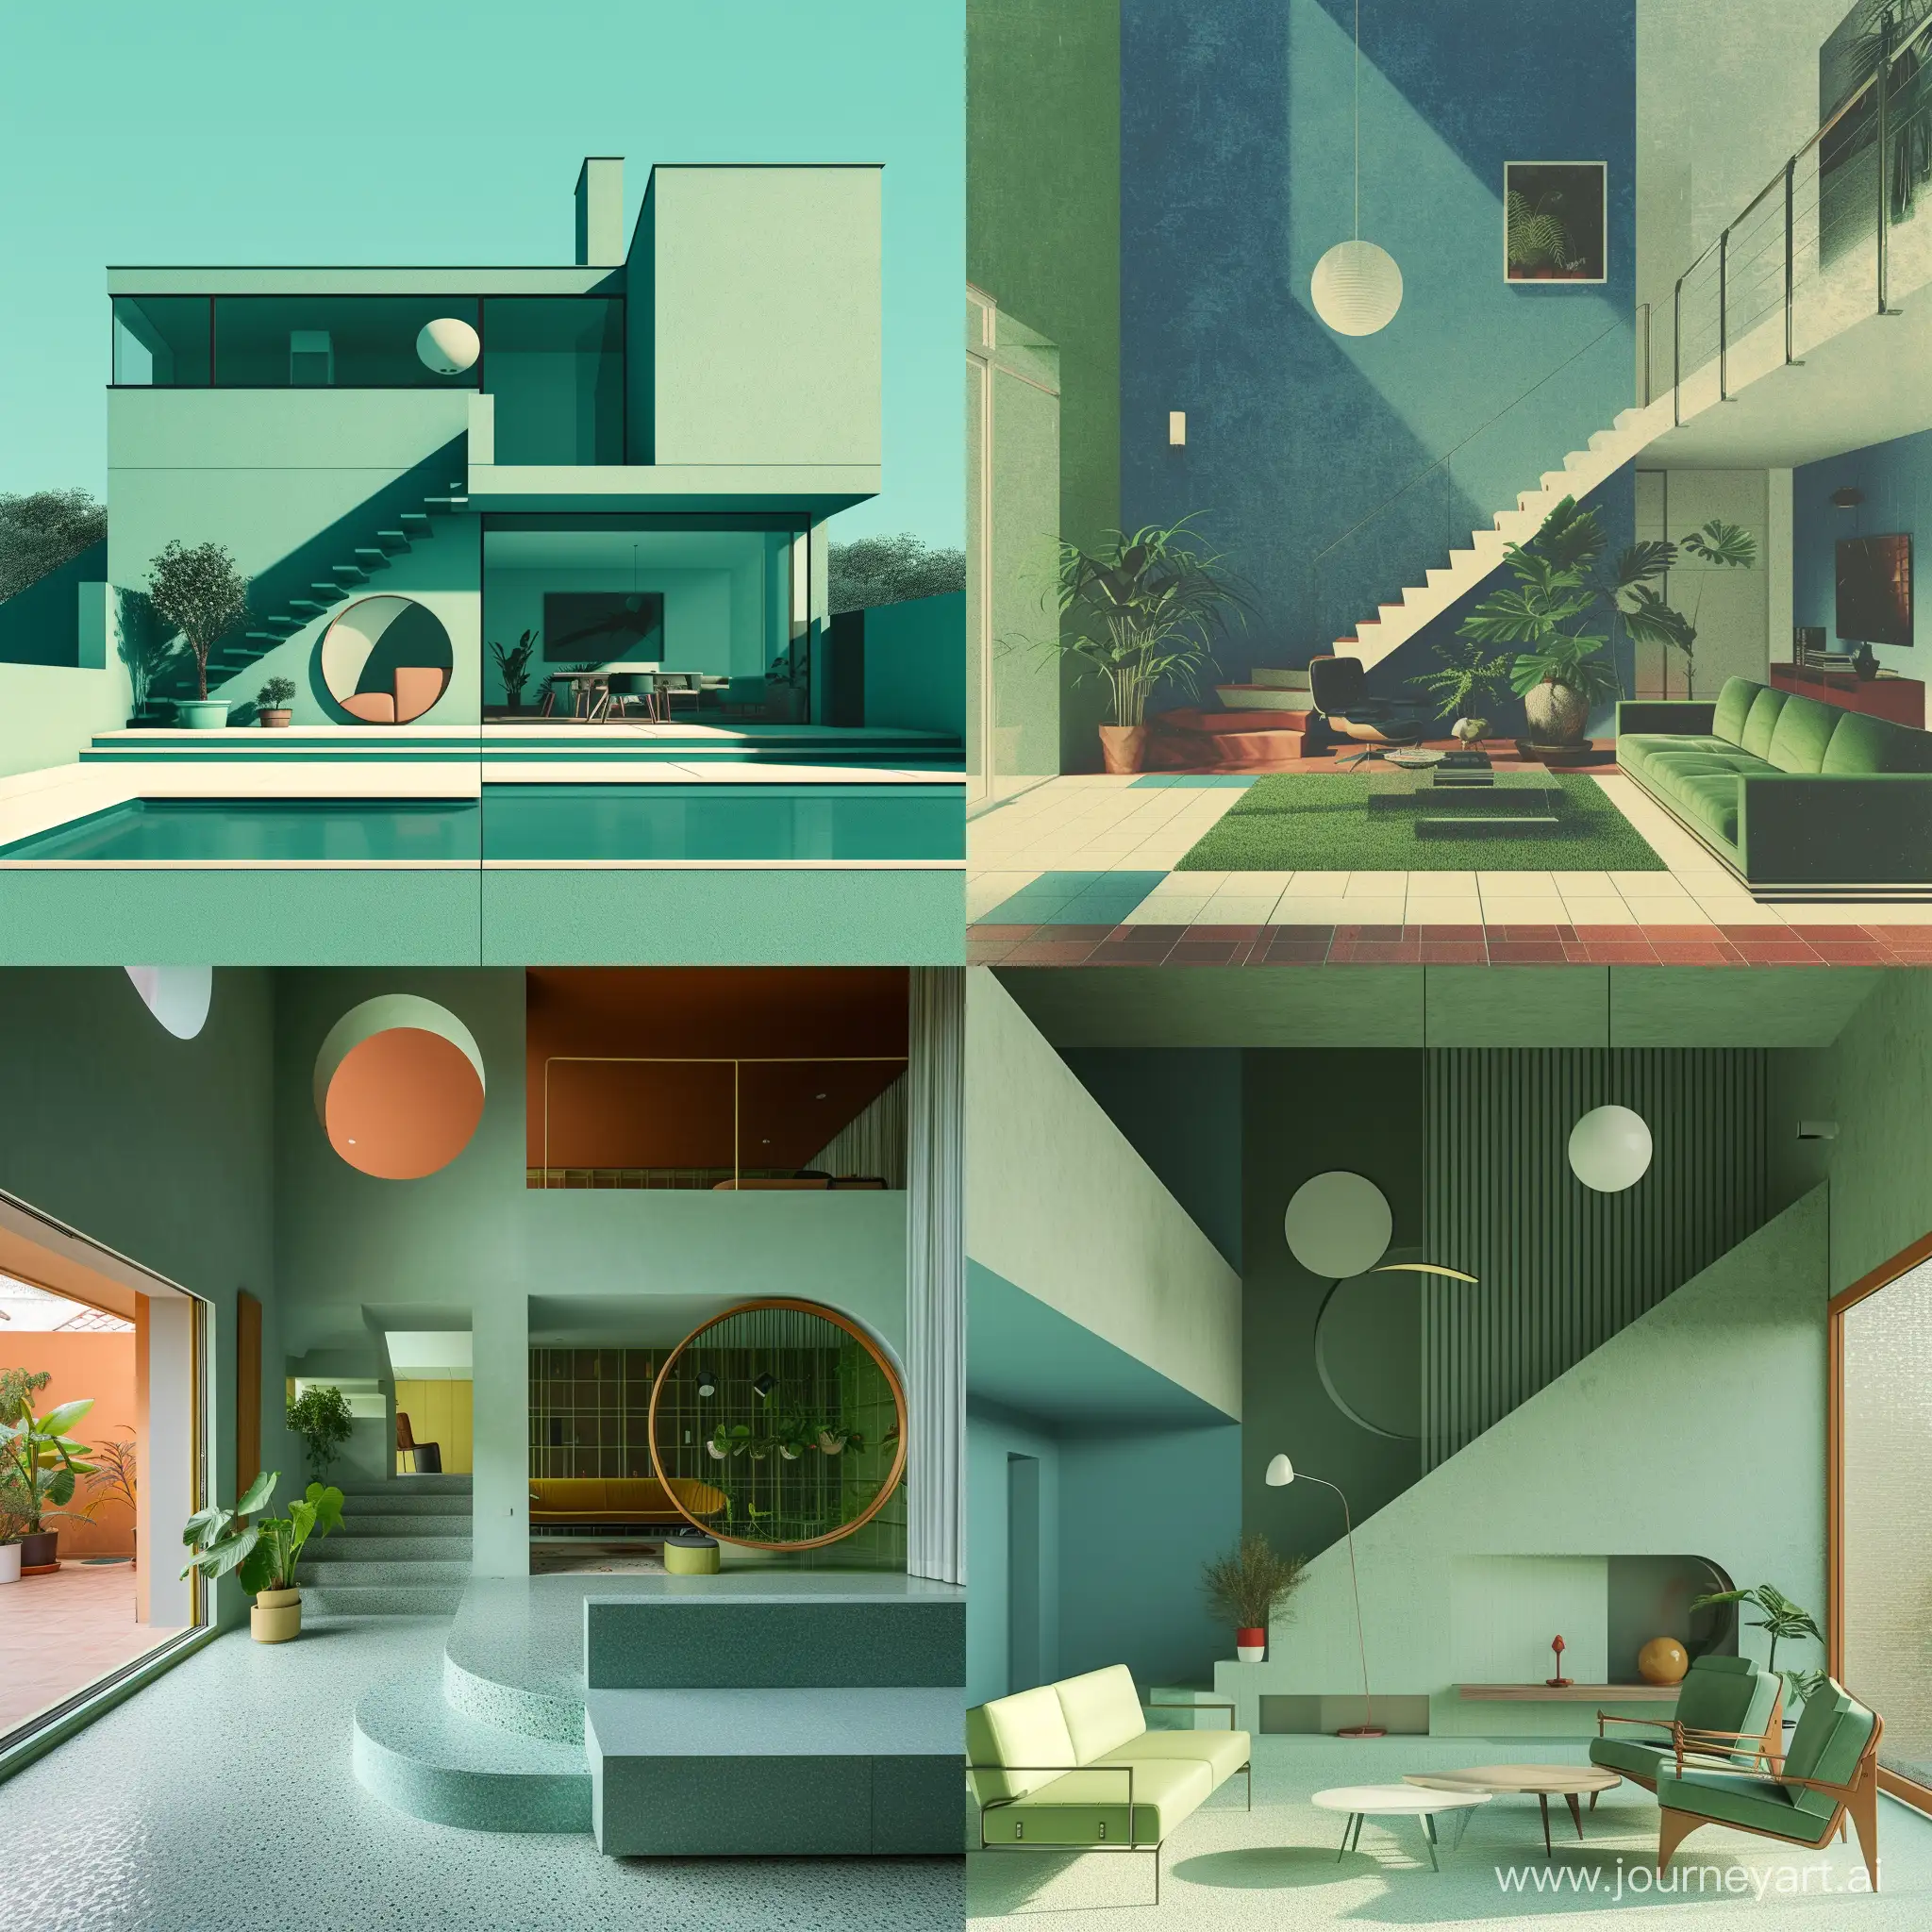 House intern, 70s style architecture, tone of green and blue